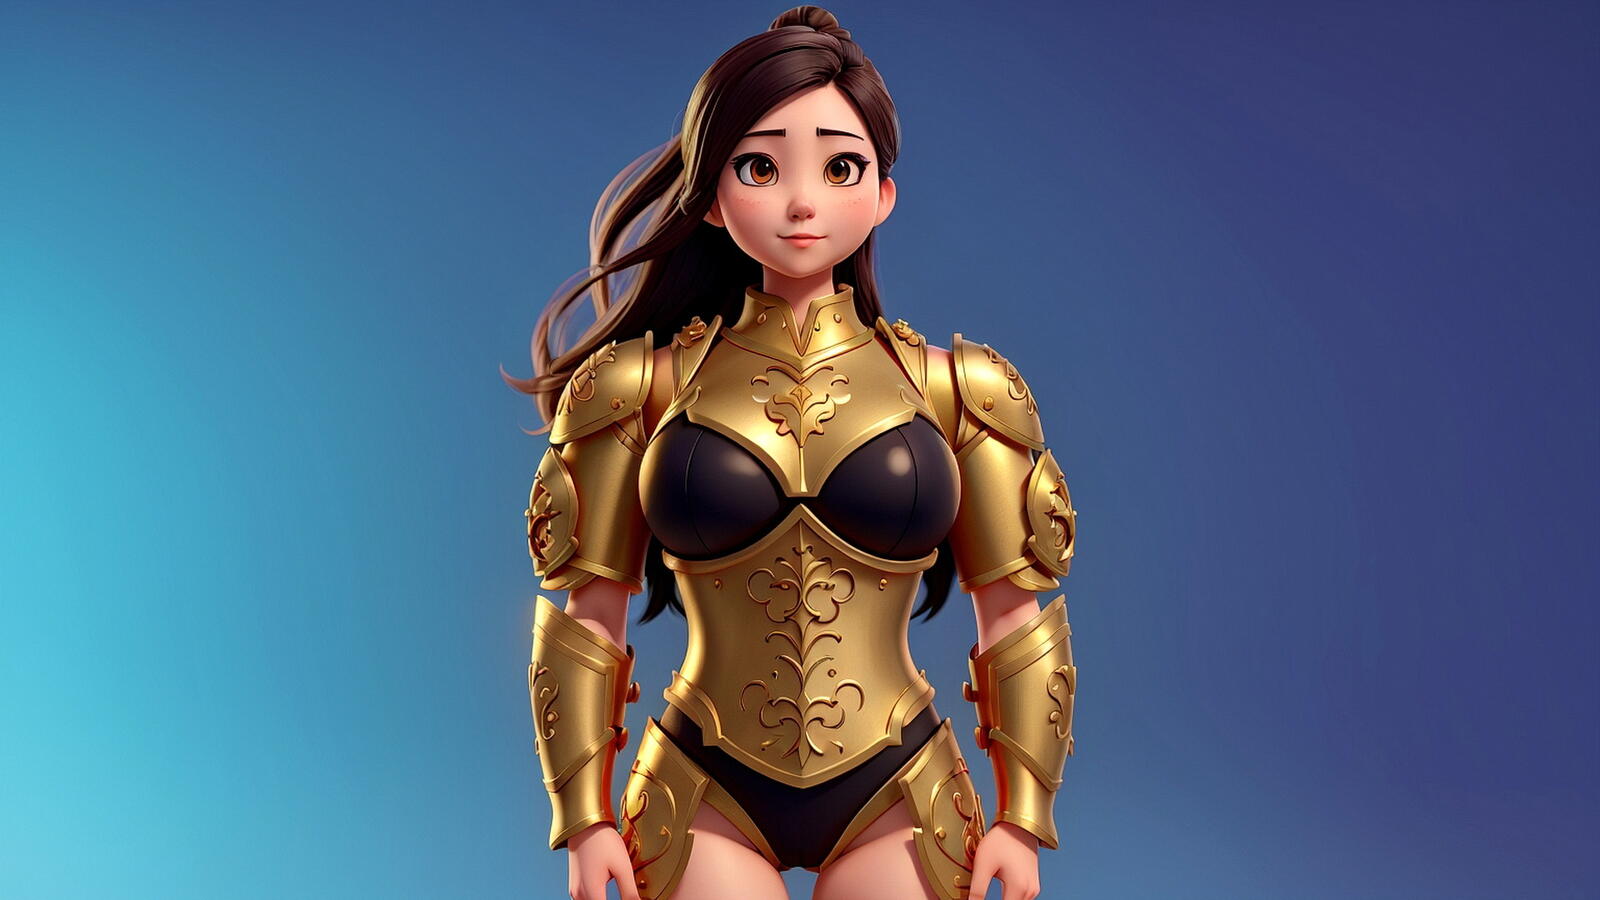 Free photo Girl warrior standing in golden armor on blue background